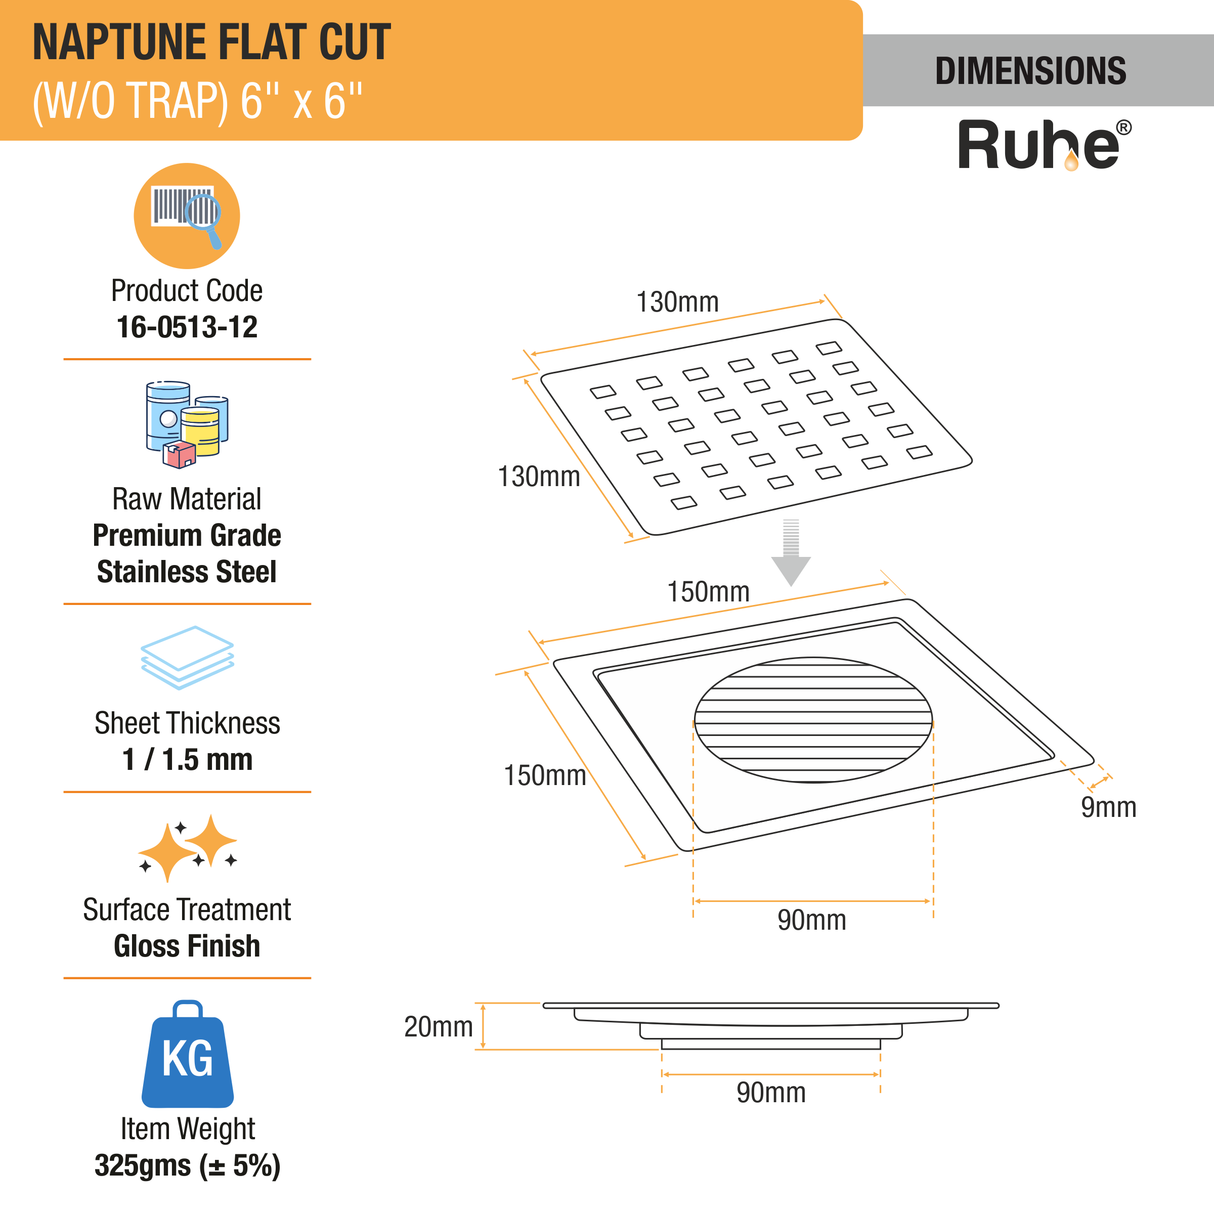 Naptune Square Flat Cut Floor Drain (6 x 6 Inches) dimensions and sizes